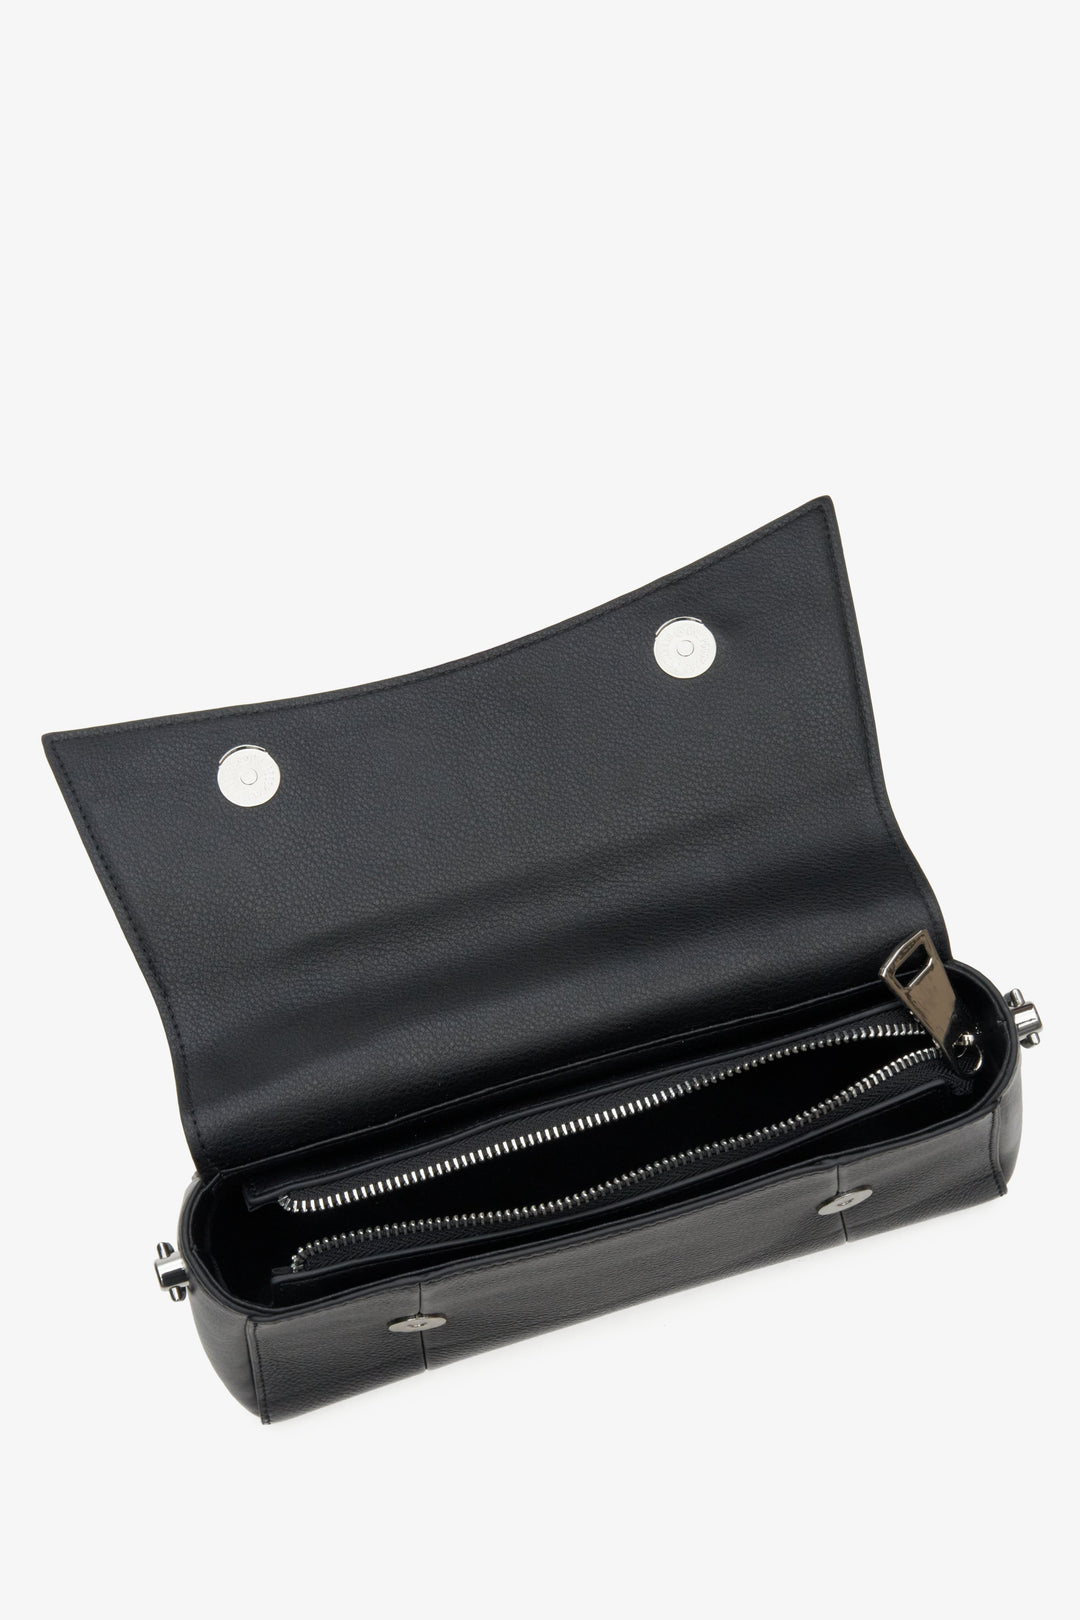 Women's leather, black shoulder bag by Estro - close-up of the interior.